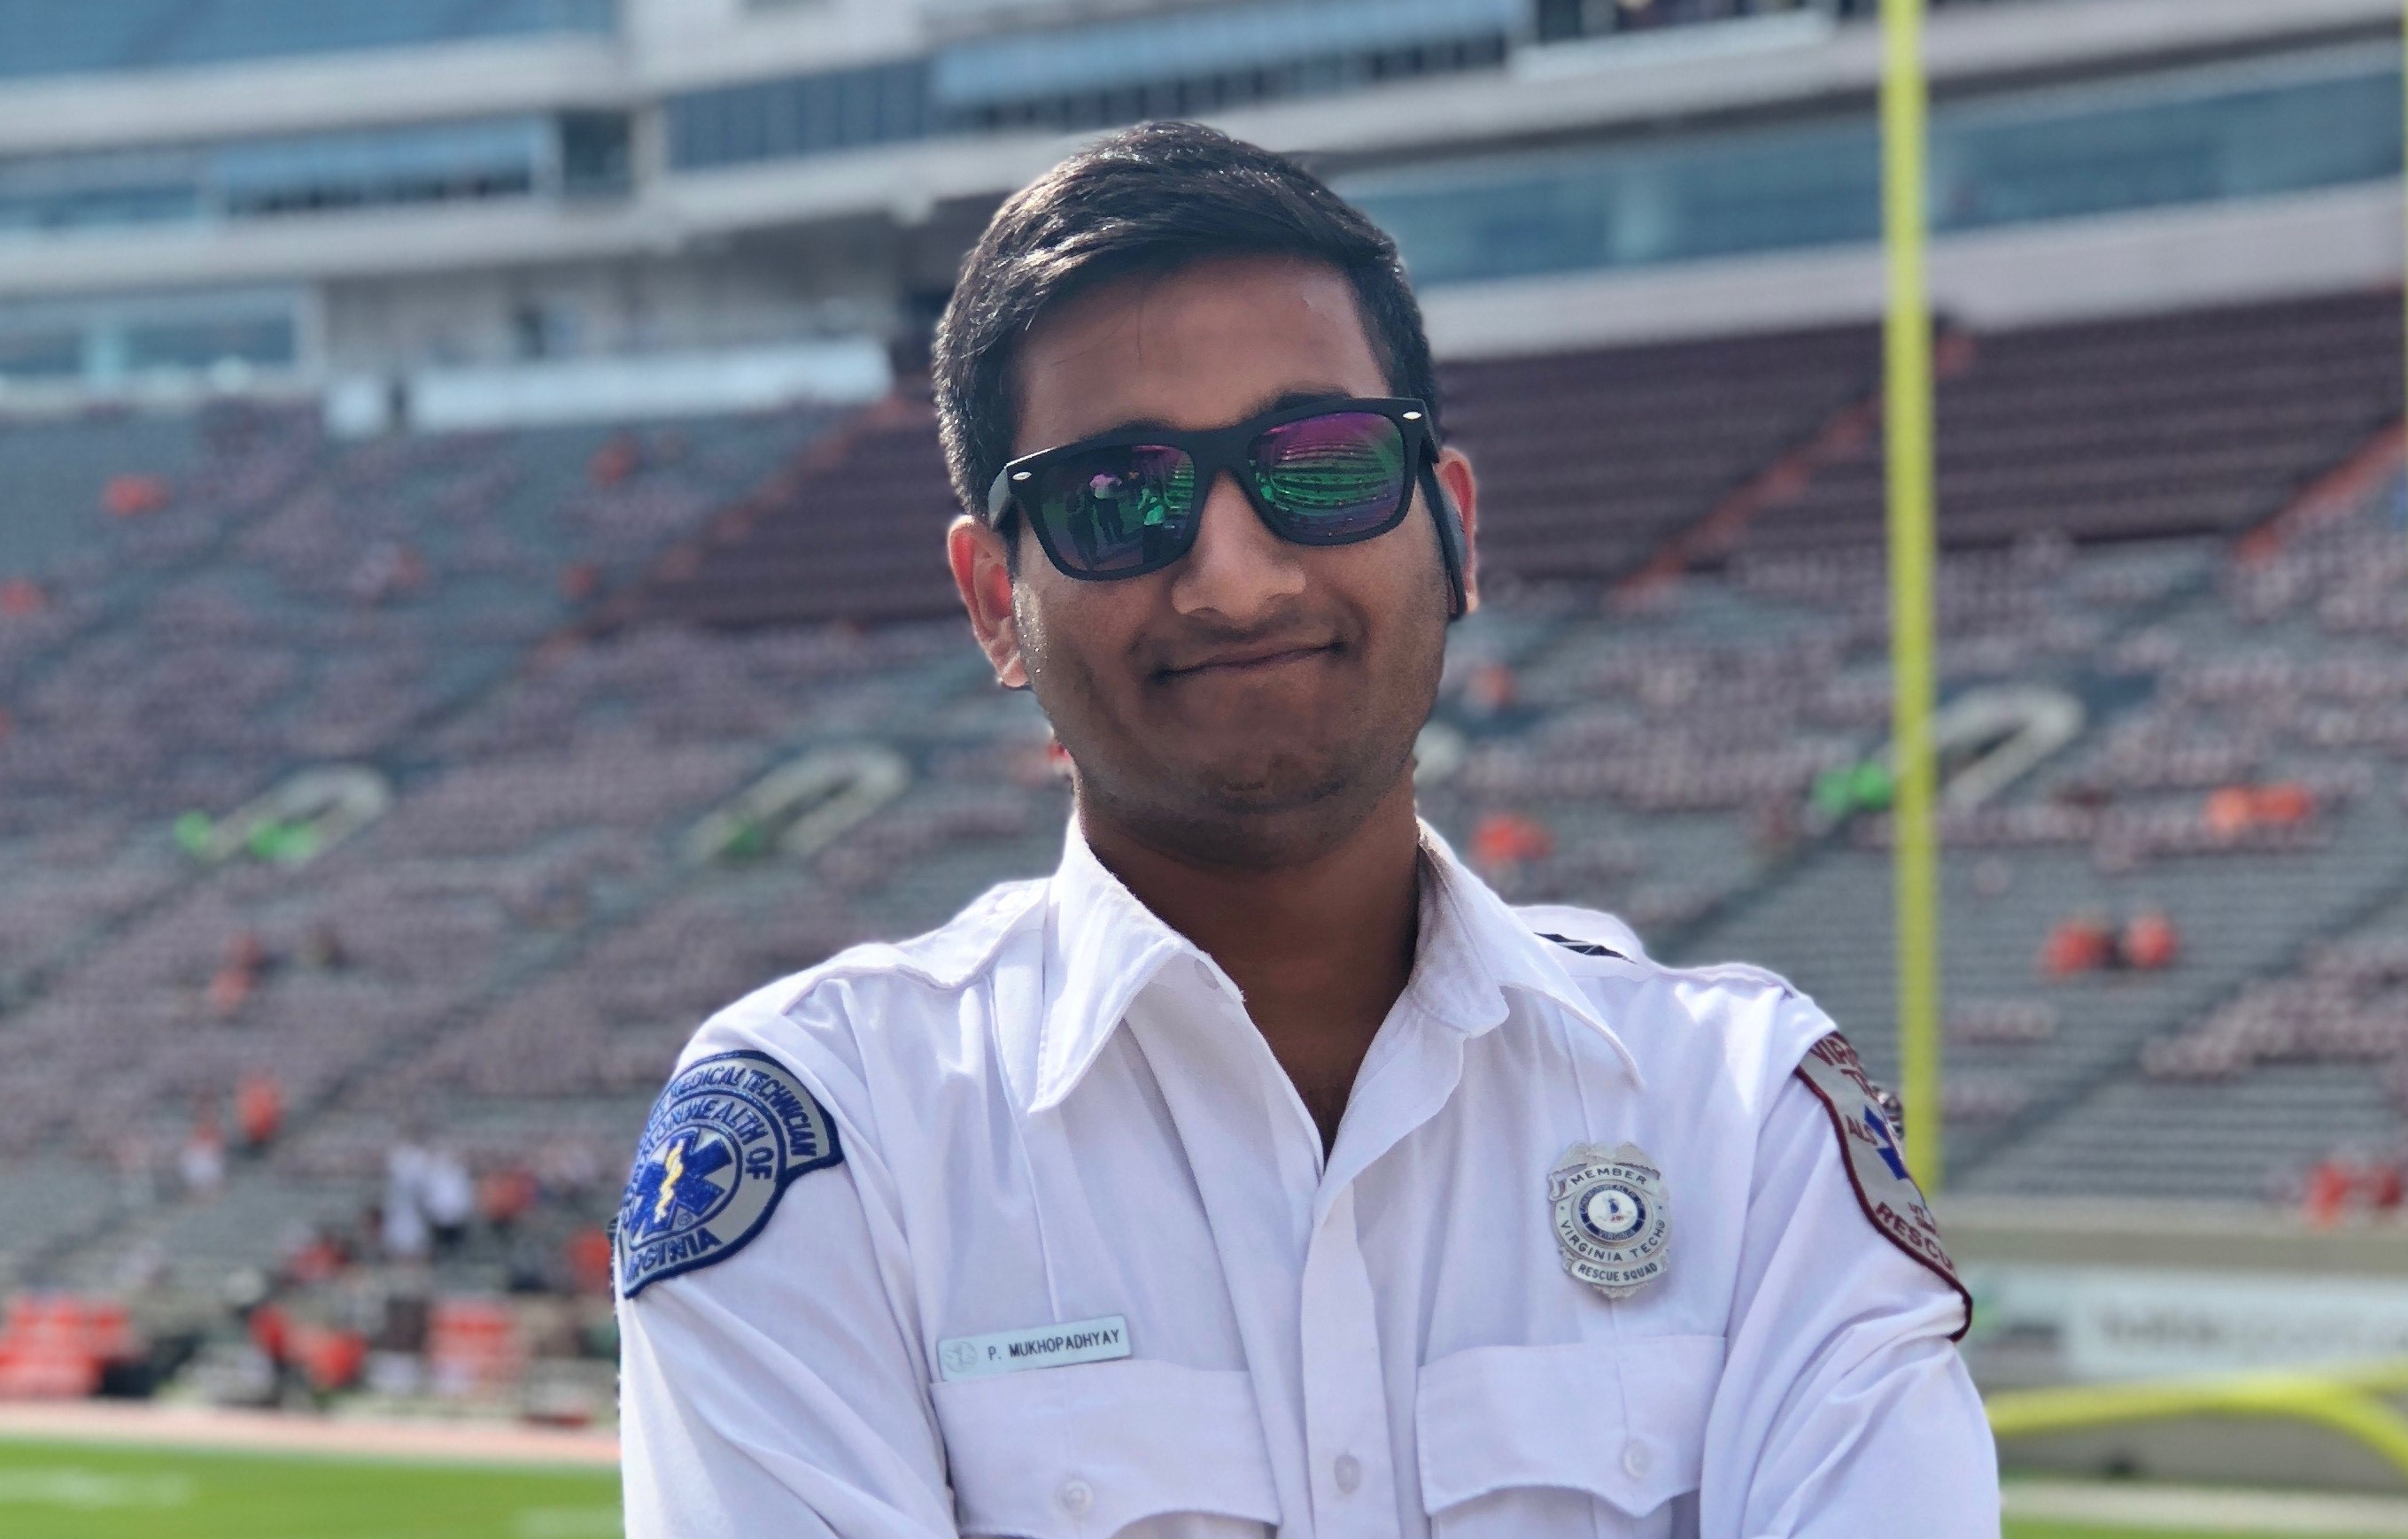  Prattyak Mukhopadhyay served as an EMT during college. 